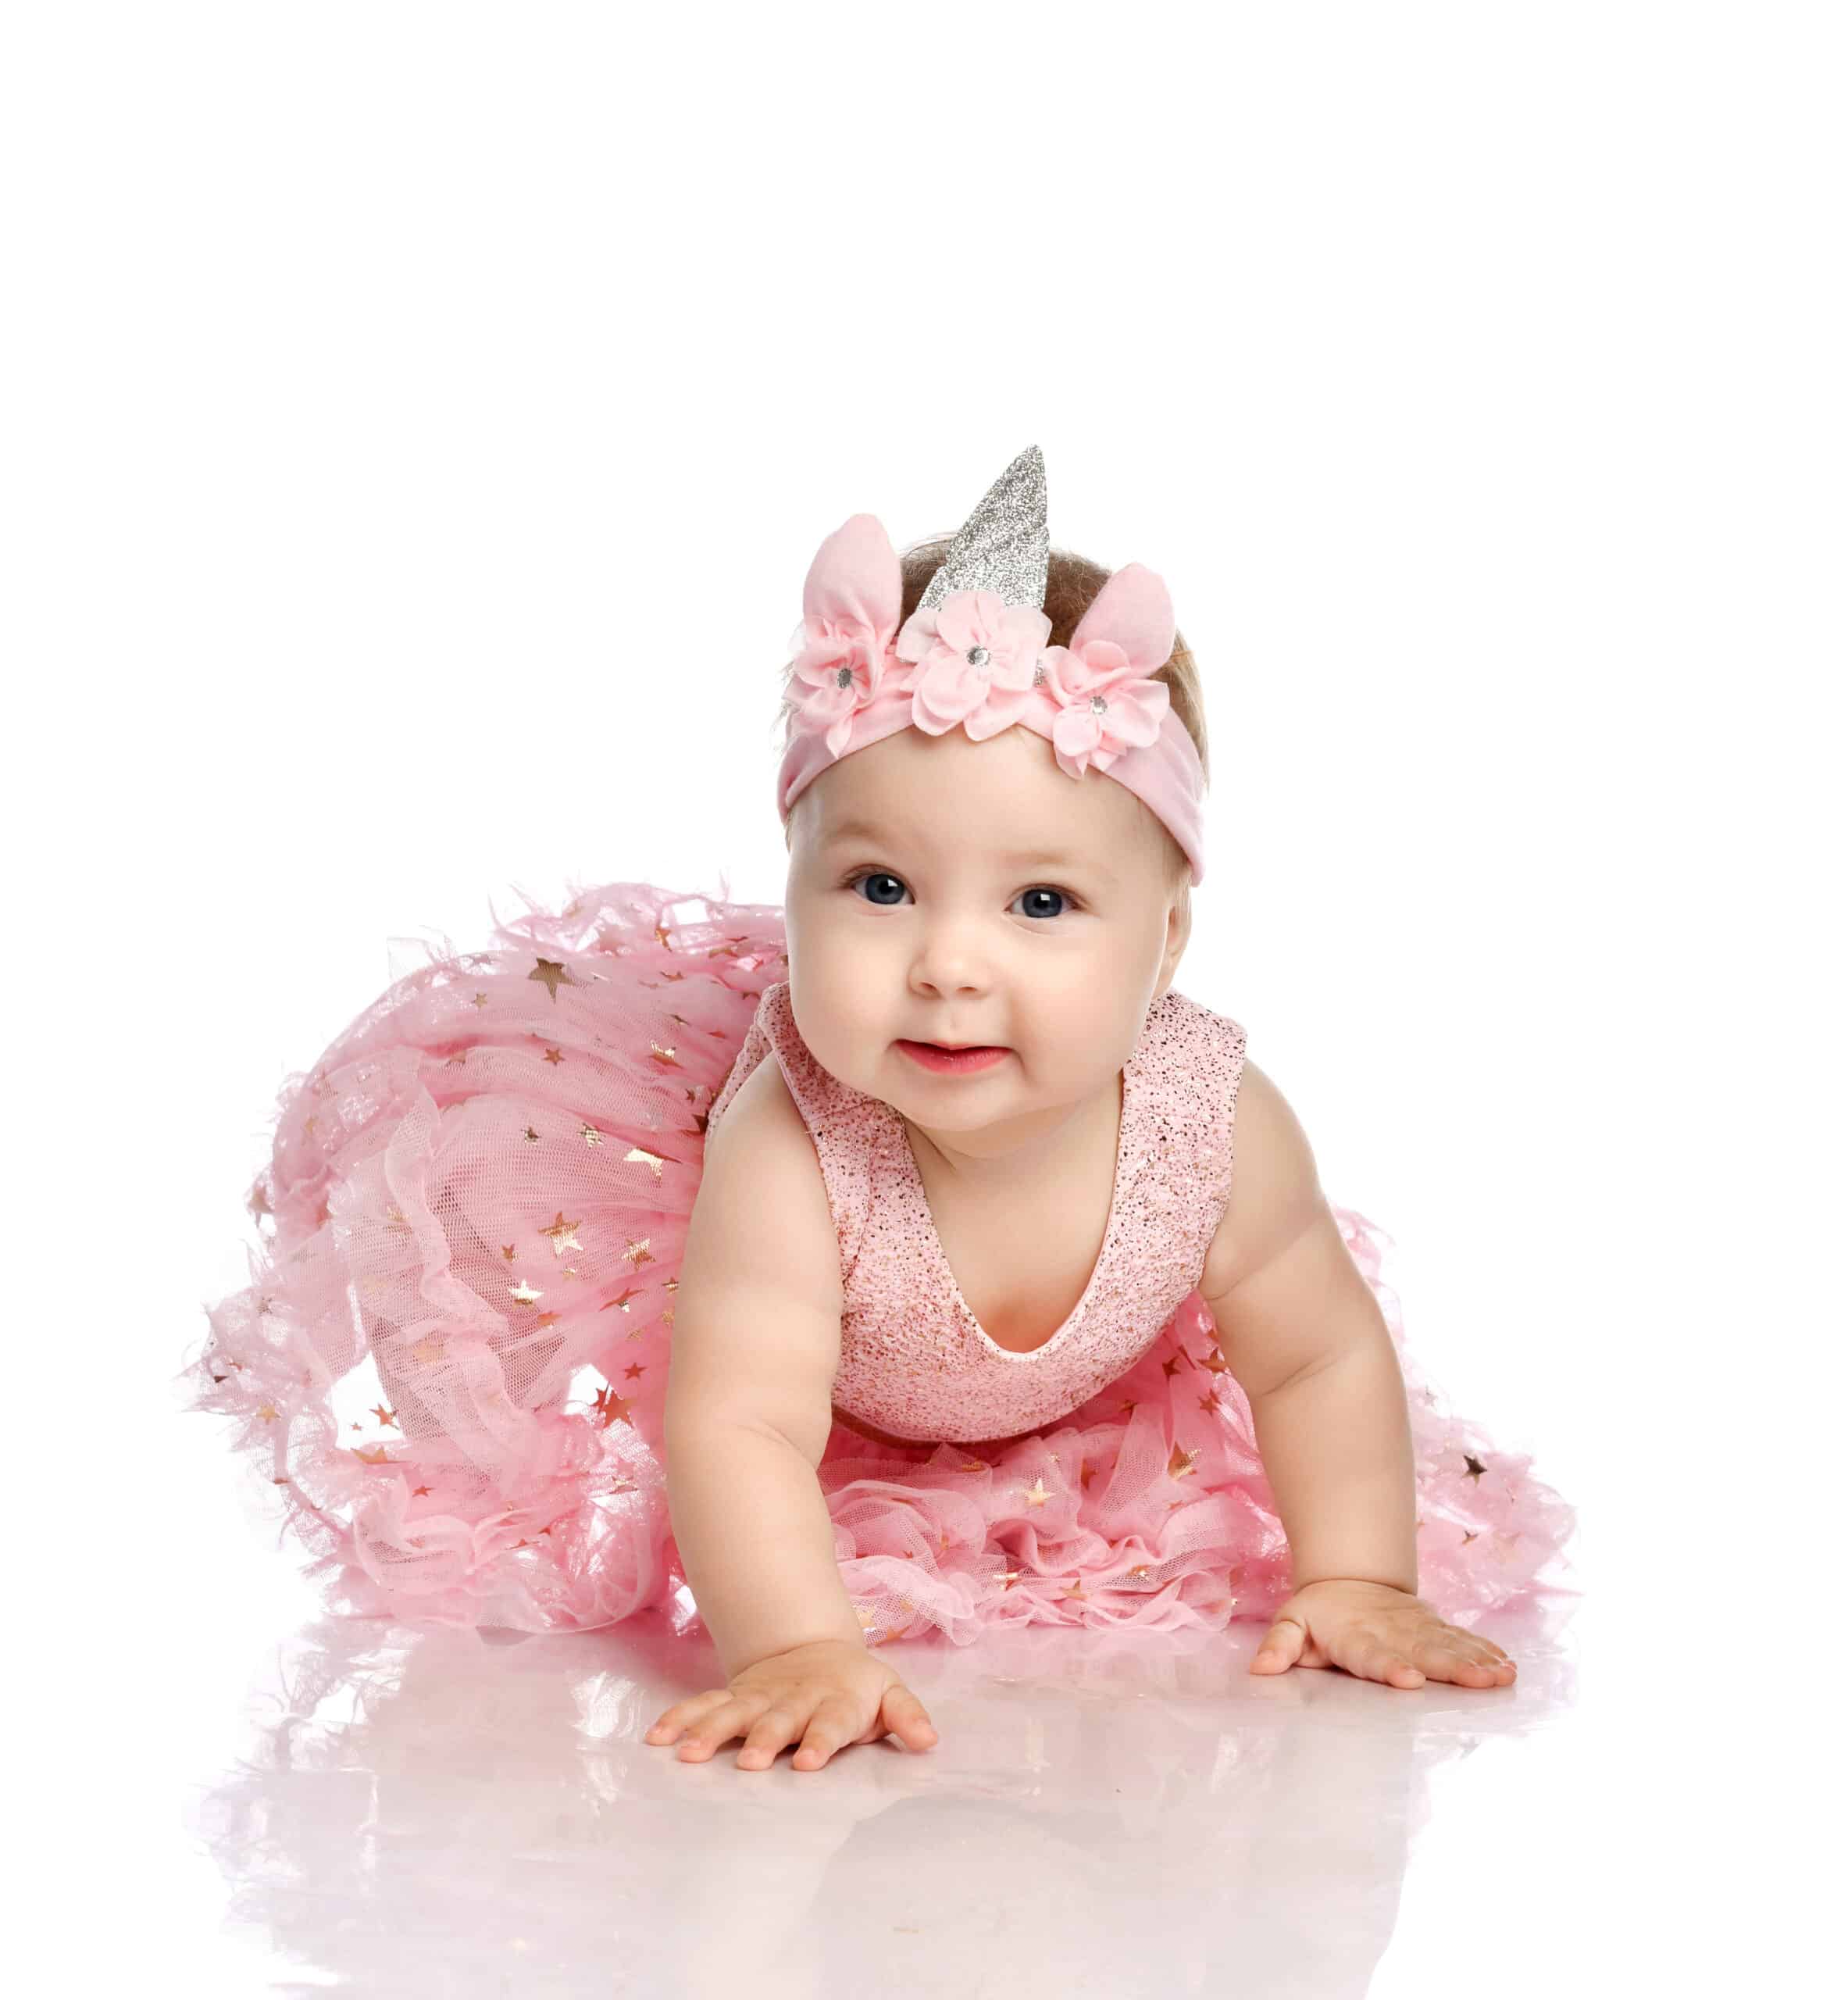 Curious adorable little infant baby girl toddler in a pink dress and crown on head, the costume of the unicorn is creeping on the floor interested in the camera over white background